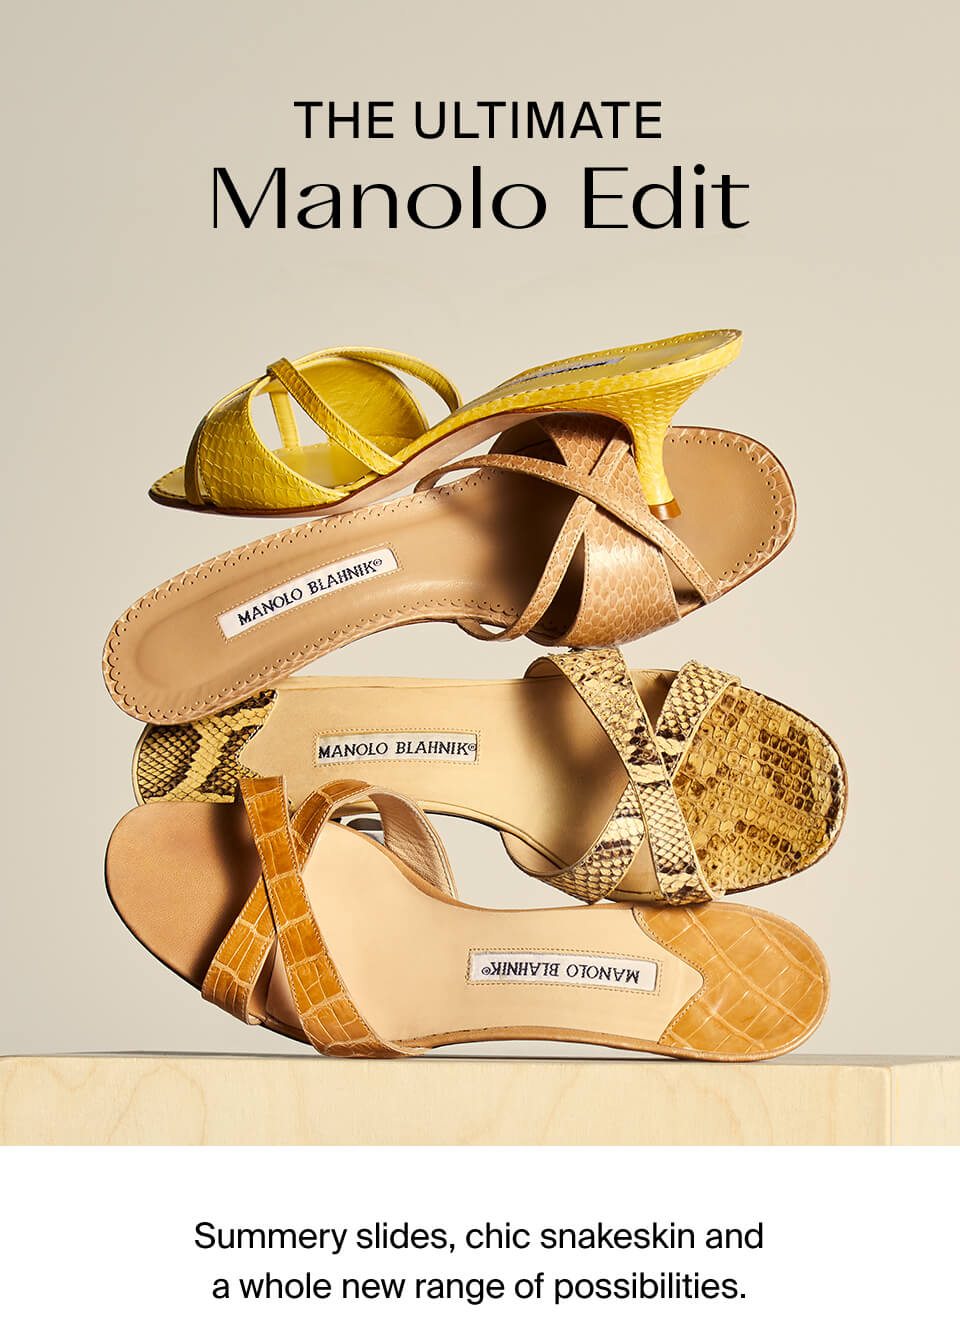 The Ultimate Manolo Edit